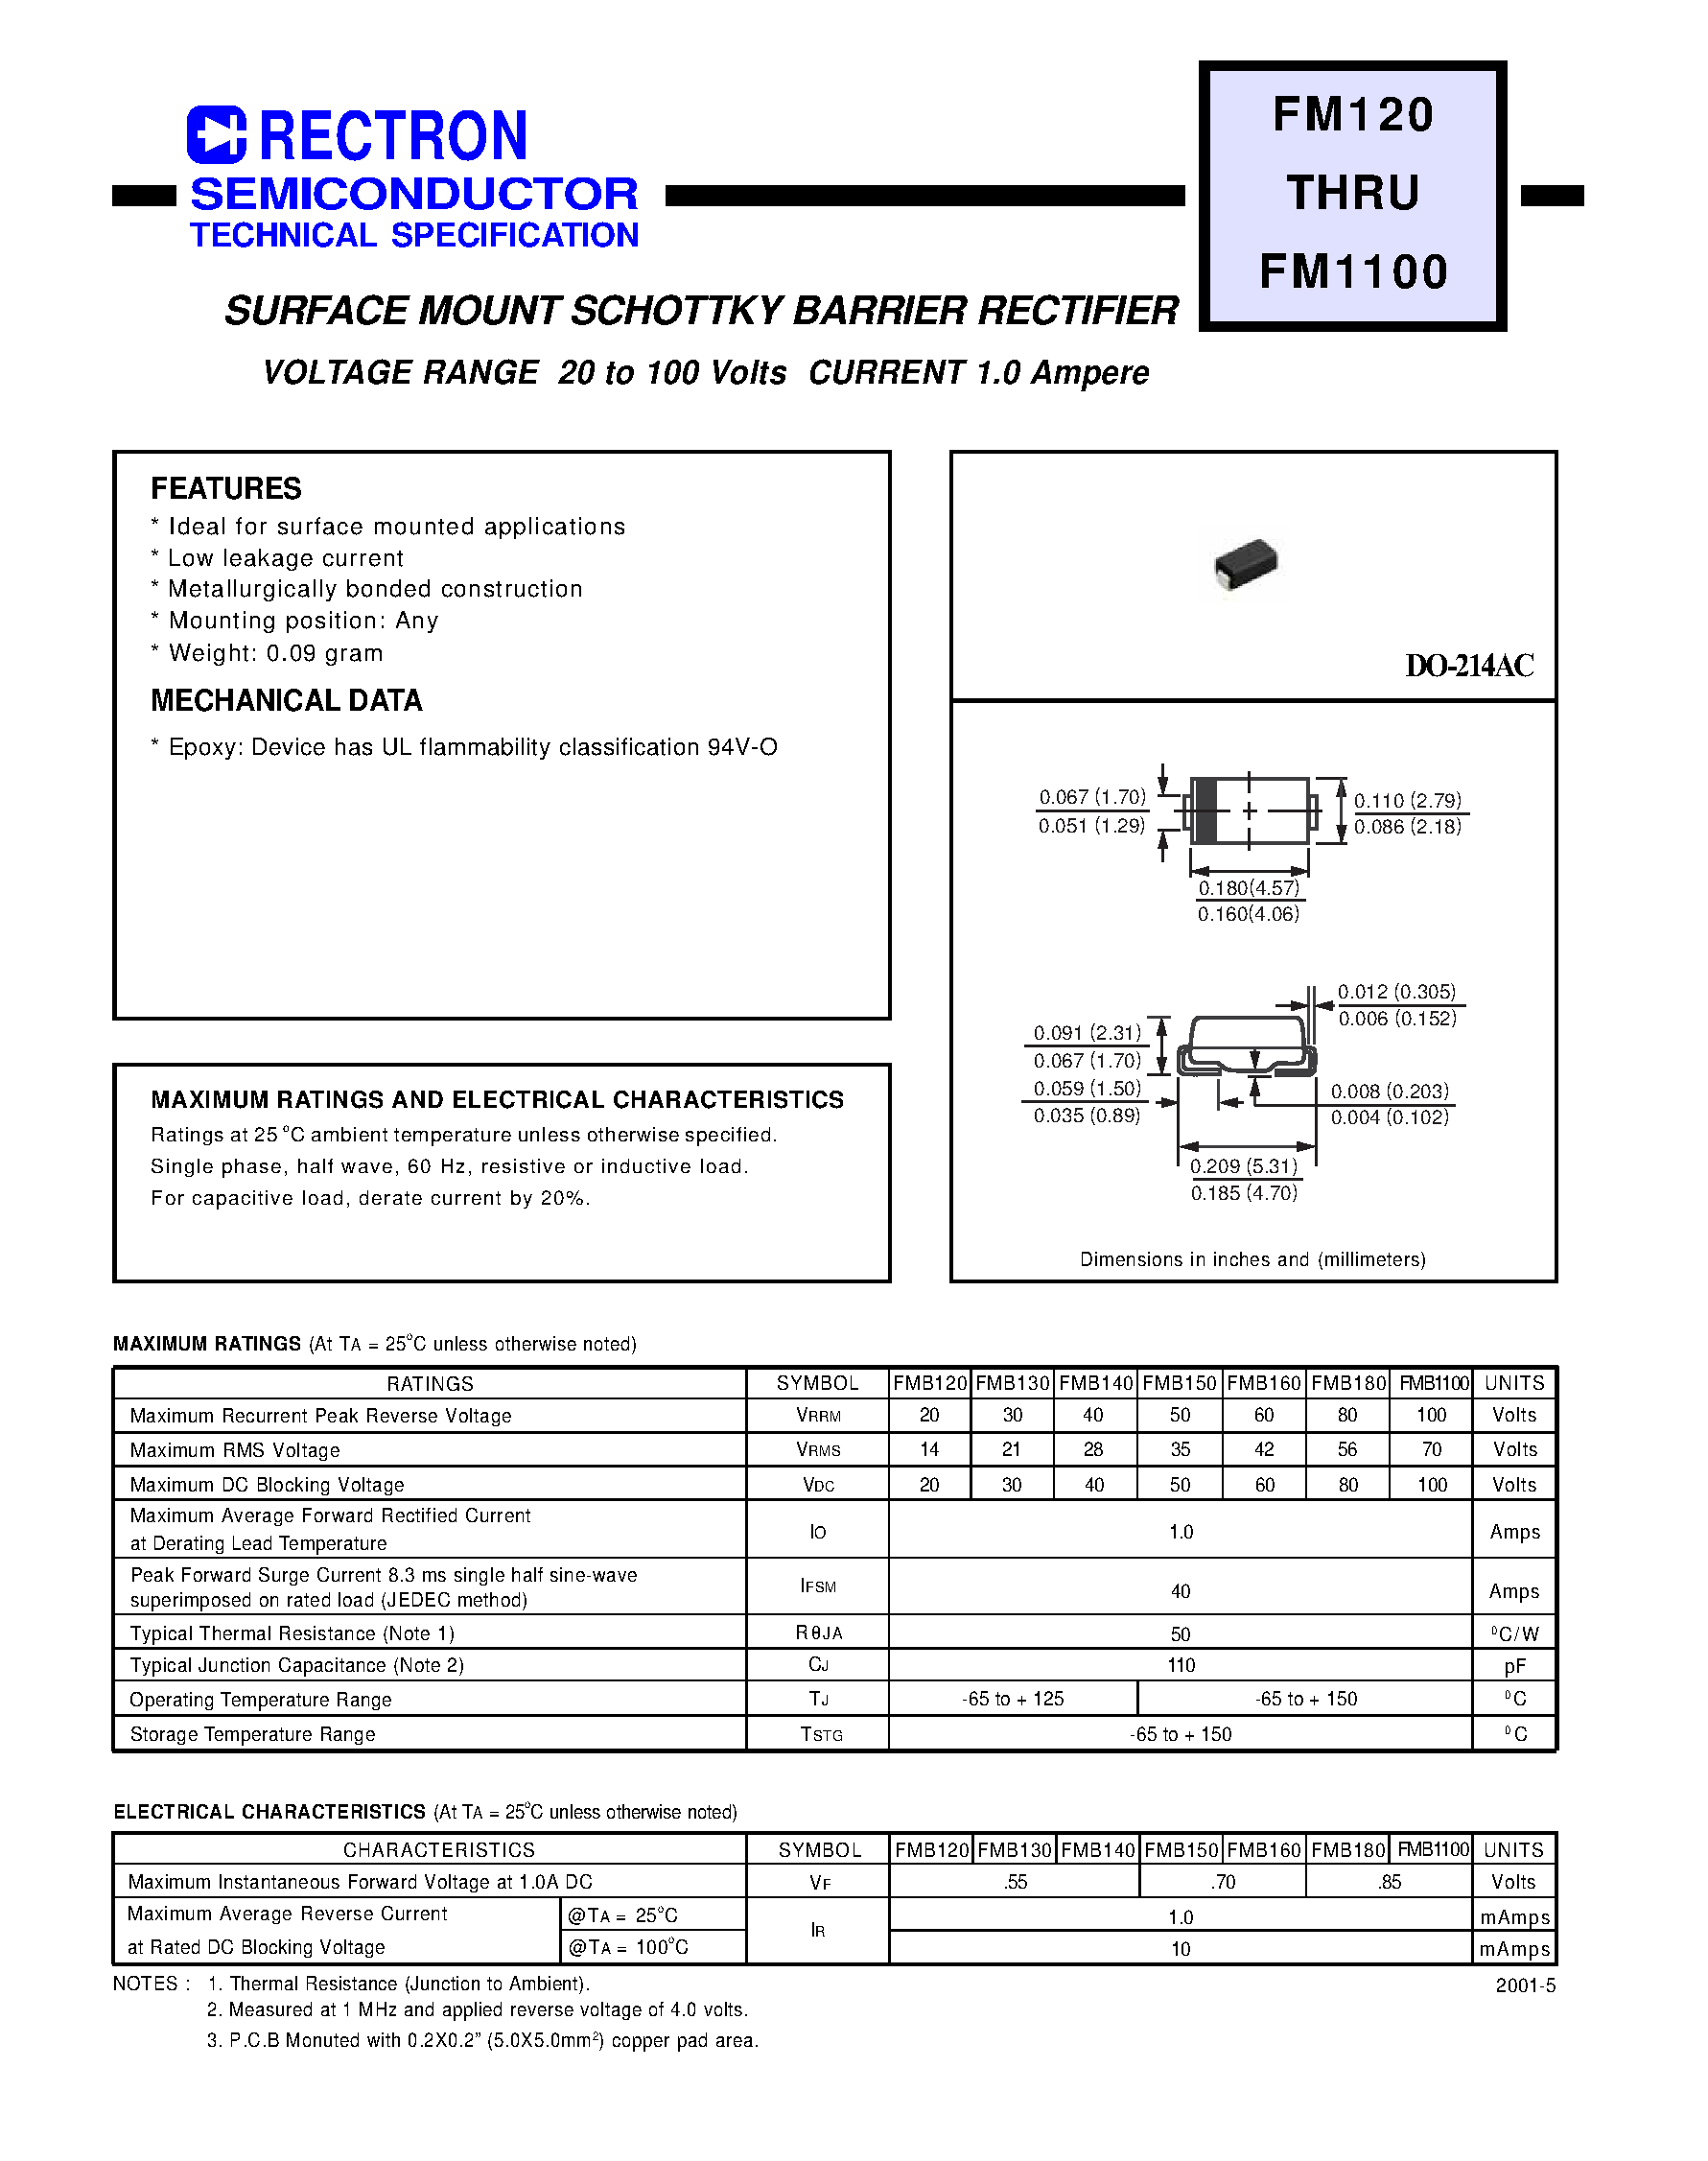 Datasheet FMB180 - SURFACE MOUNT SCHOTTKY BARRIER RECTIFIER (VOLTAGE RANGE 20 to 100 Volts CURRENT 1.0 Ampere) page 1